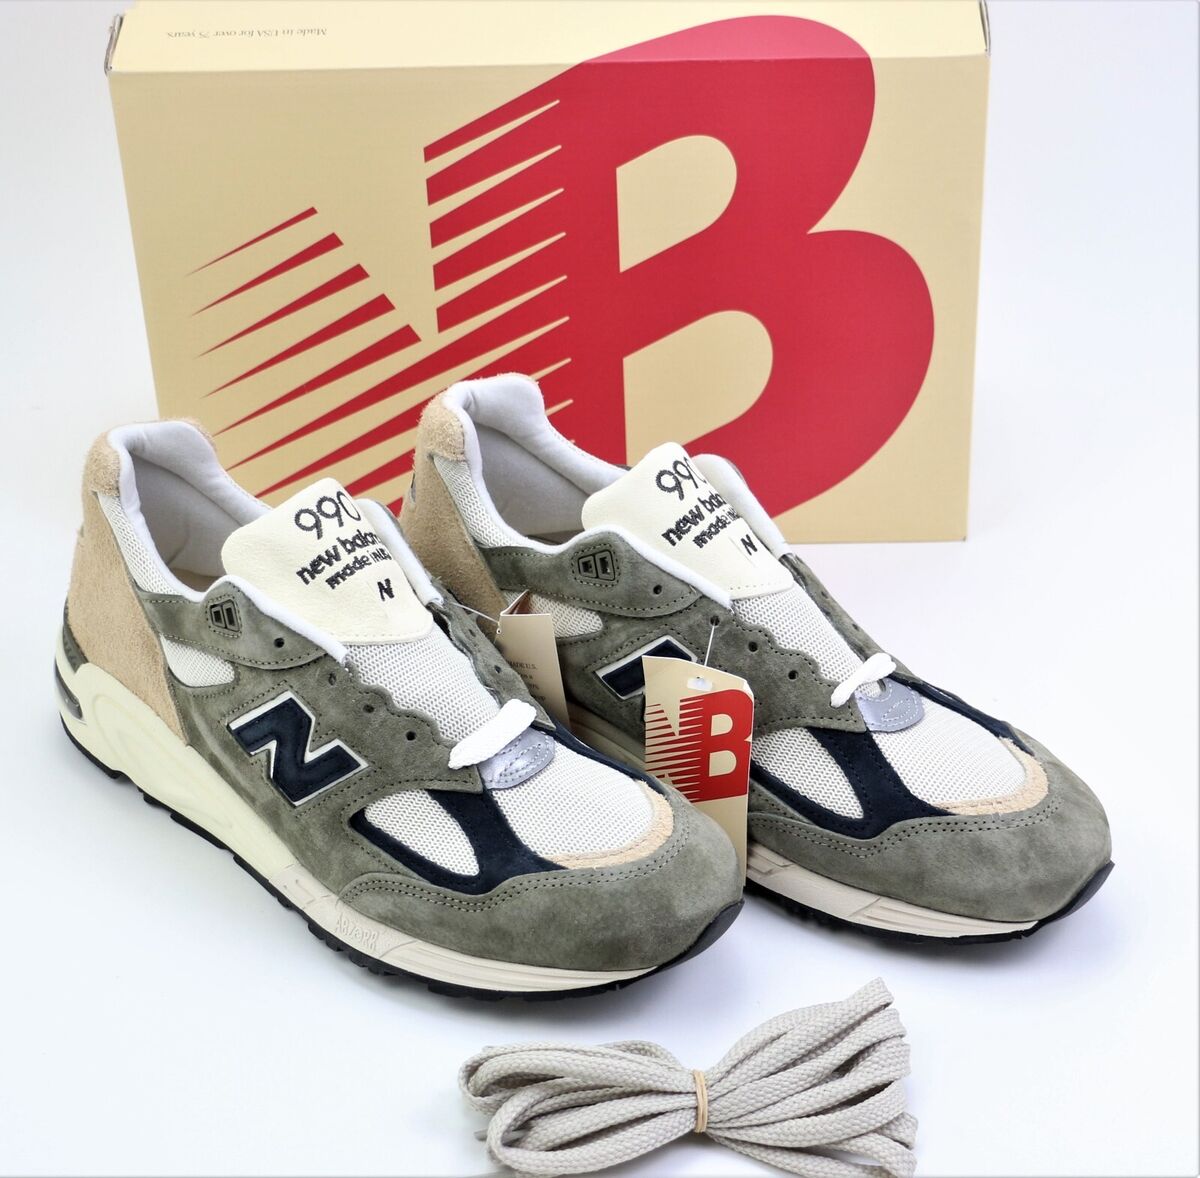 New Balance 990v2 Made In USA Shoes Teddy Santis Men's Size 12 